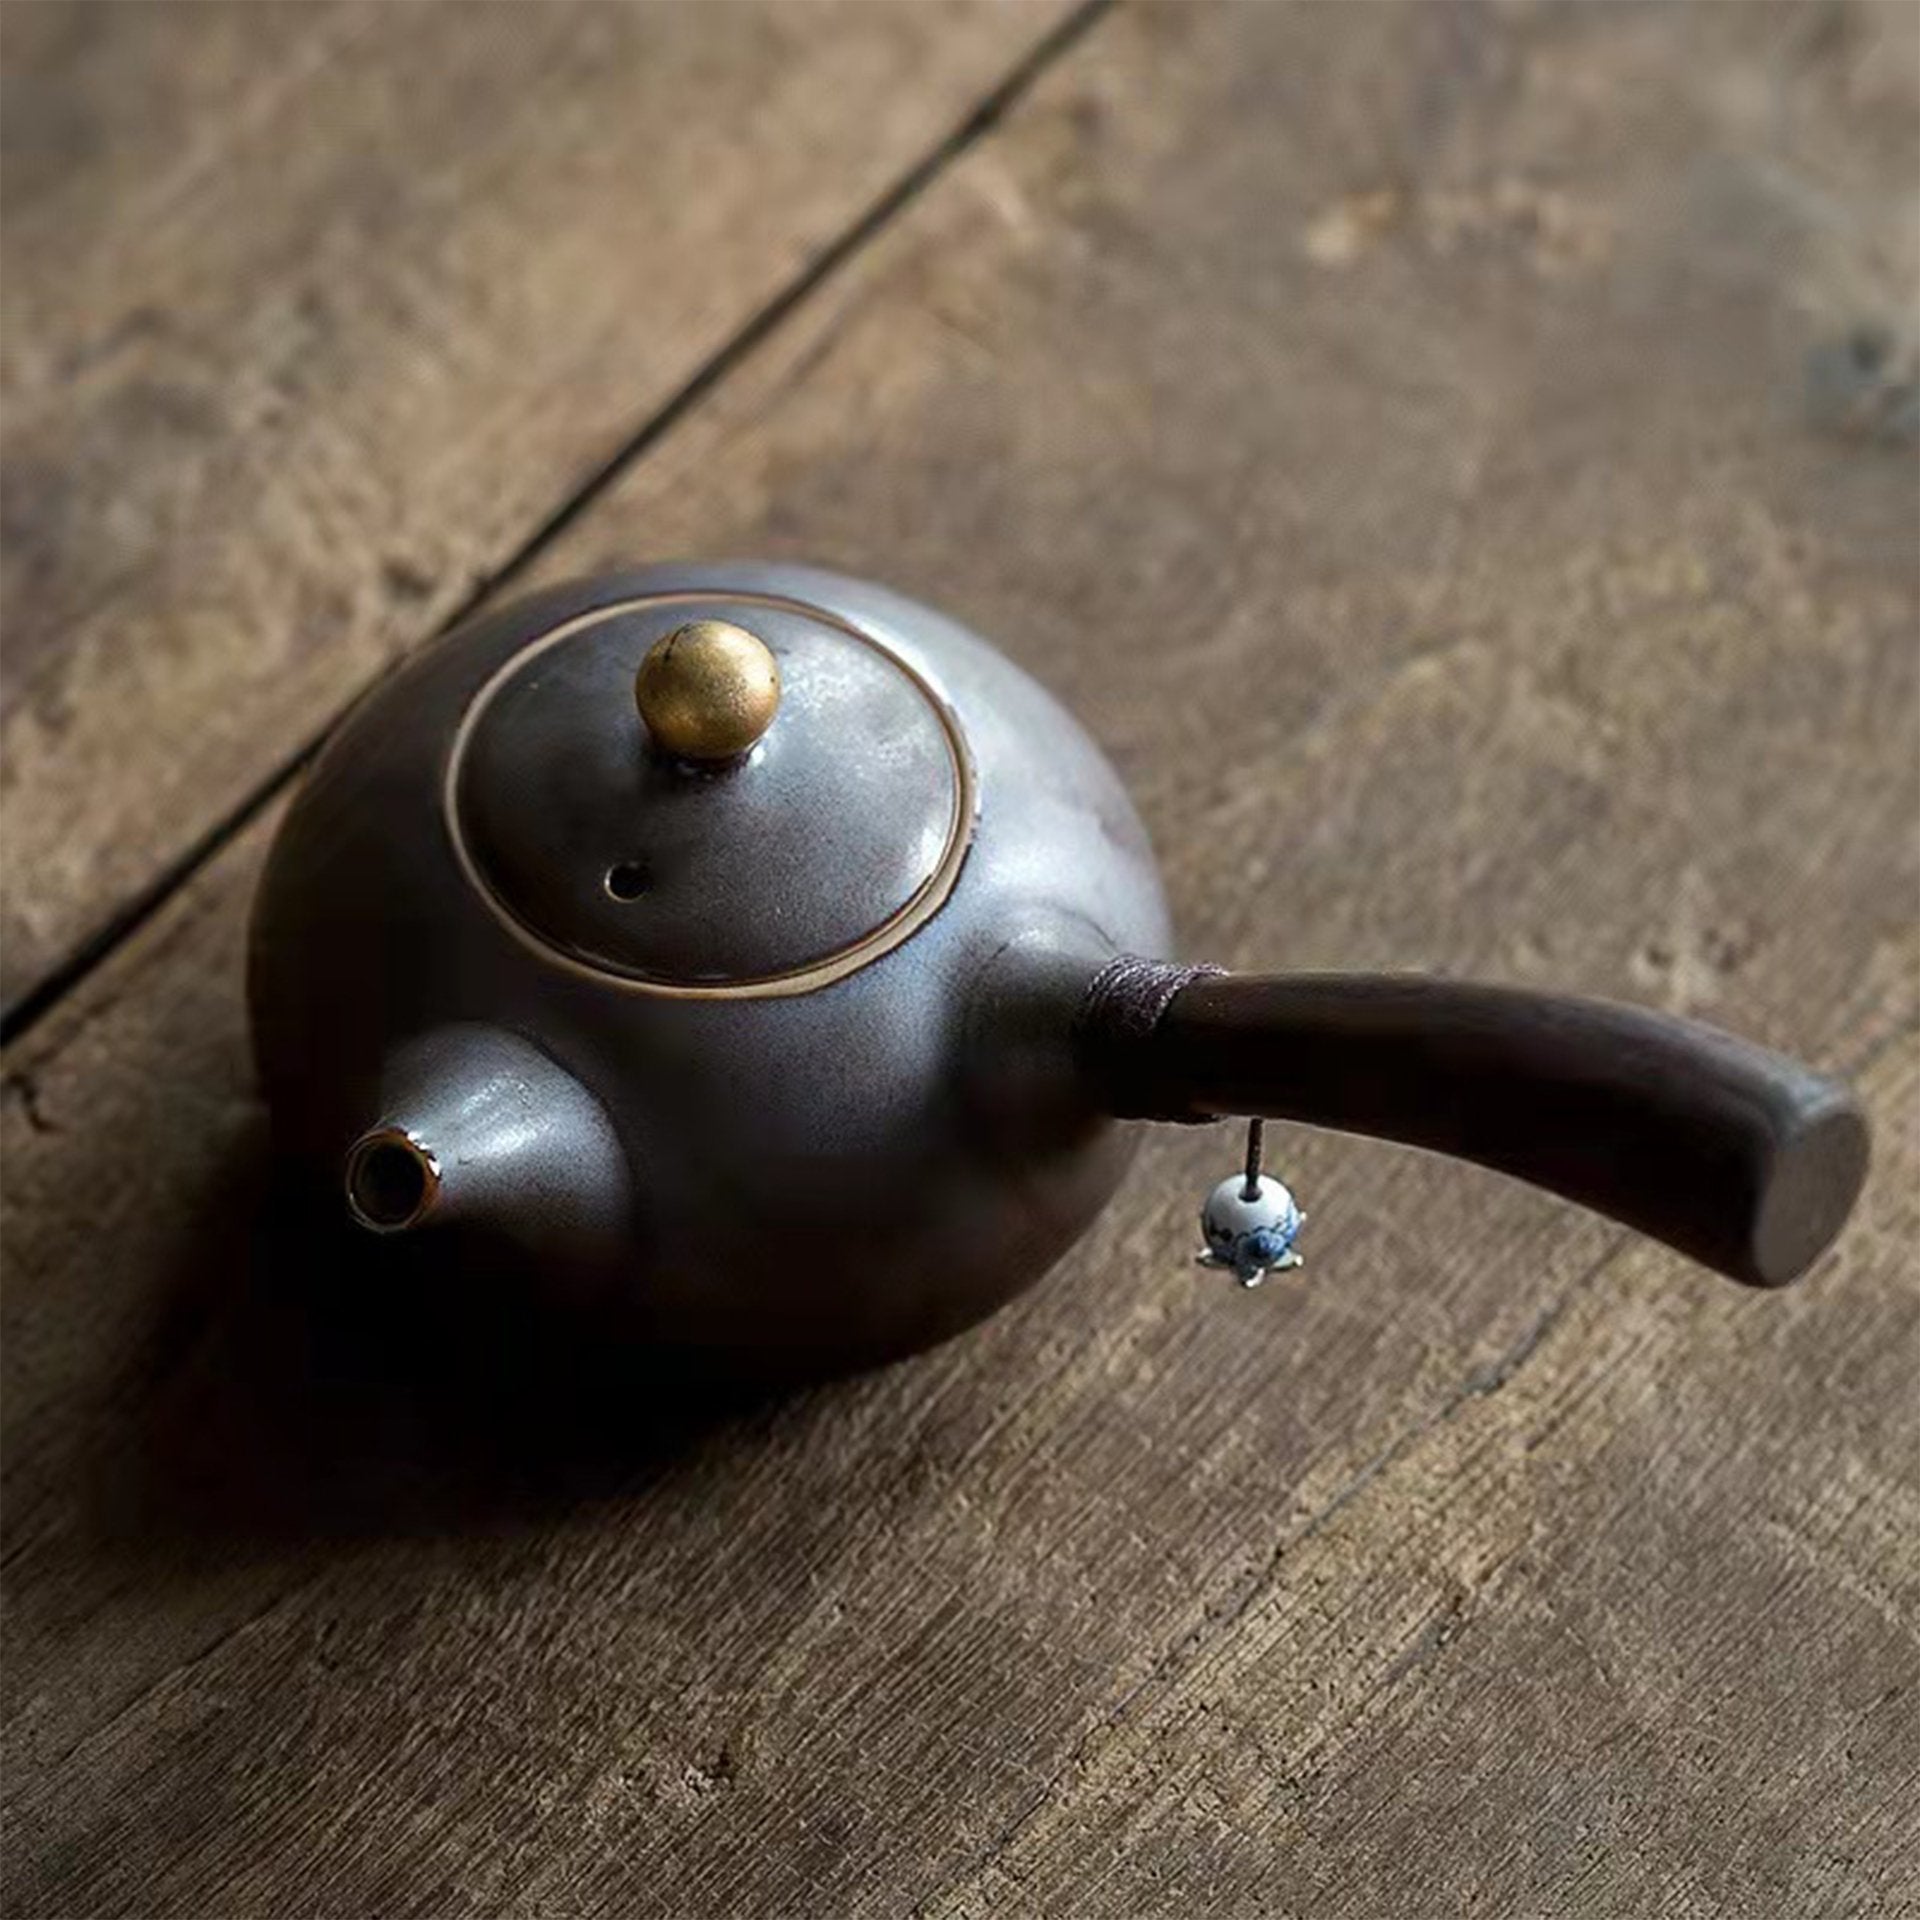 Side-handle teapot with a black body and wooden handle on a wooden surface